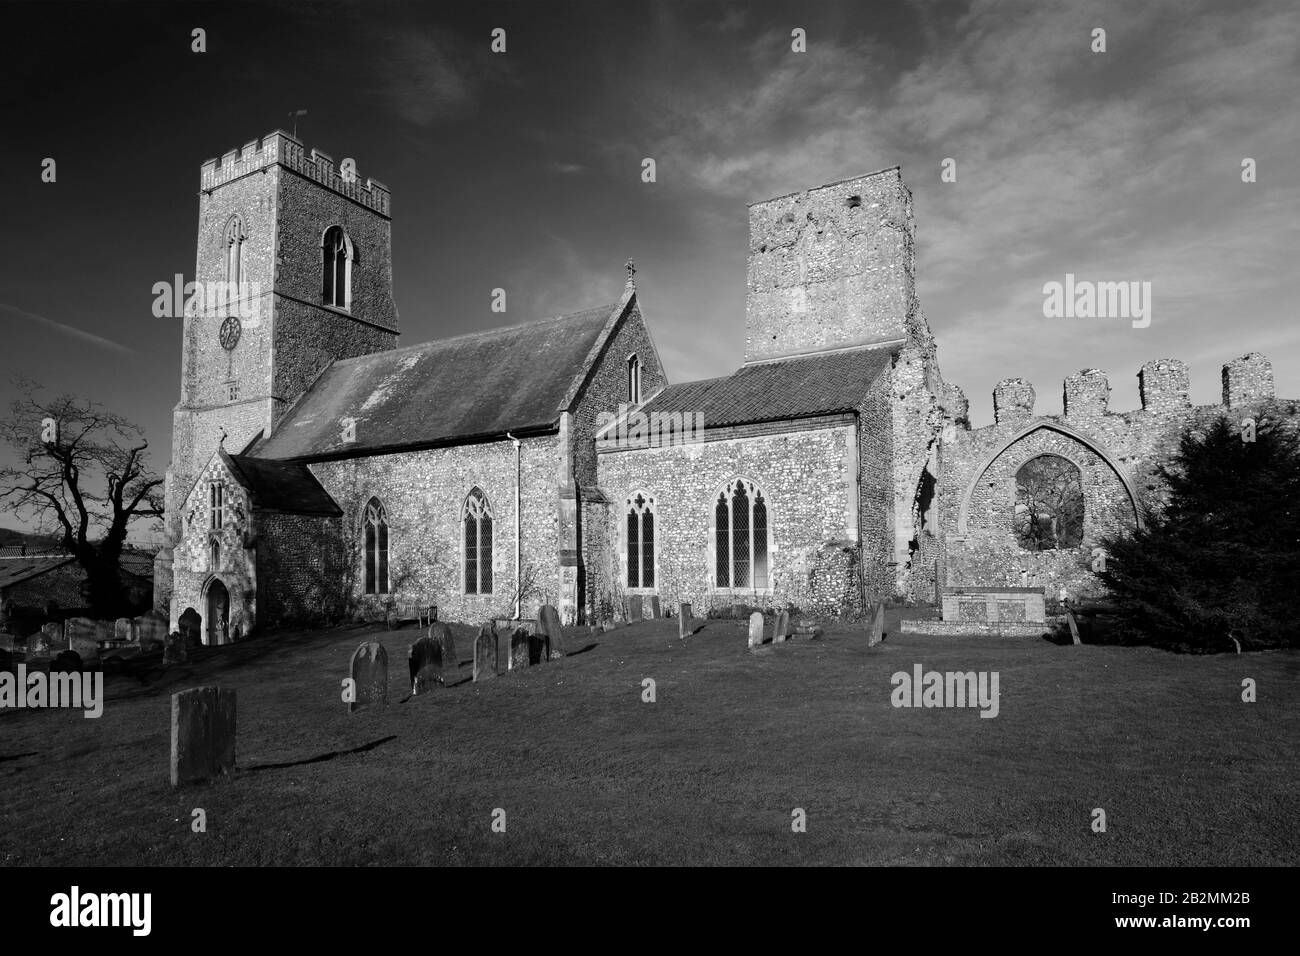 View of Weybourne Priory and All Saints Church, Weybourne village, North Norfolk, England, UK Stock Photo